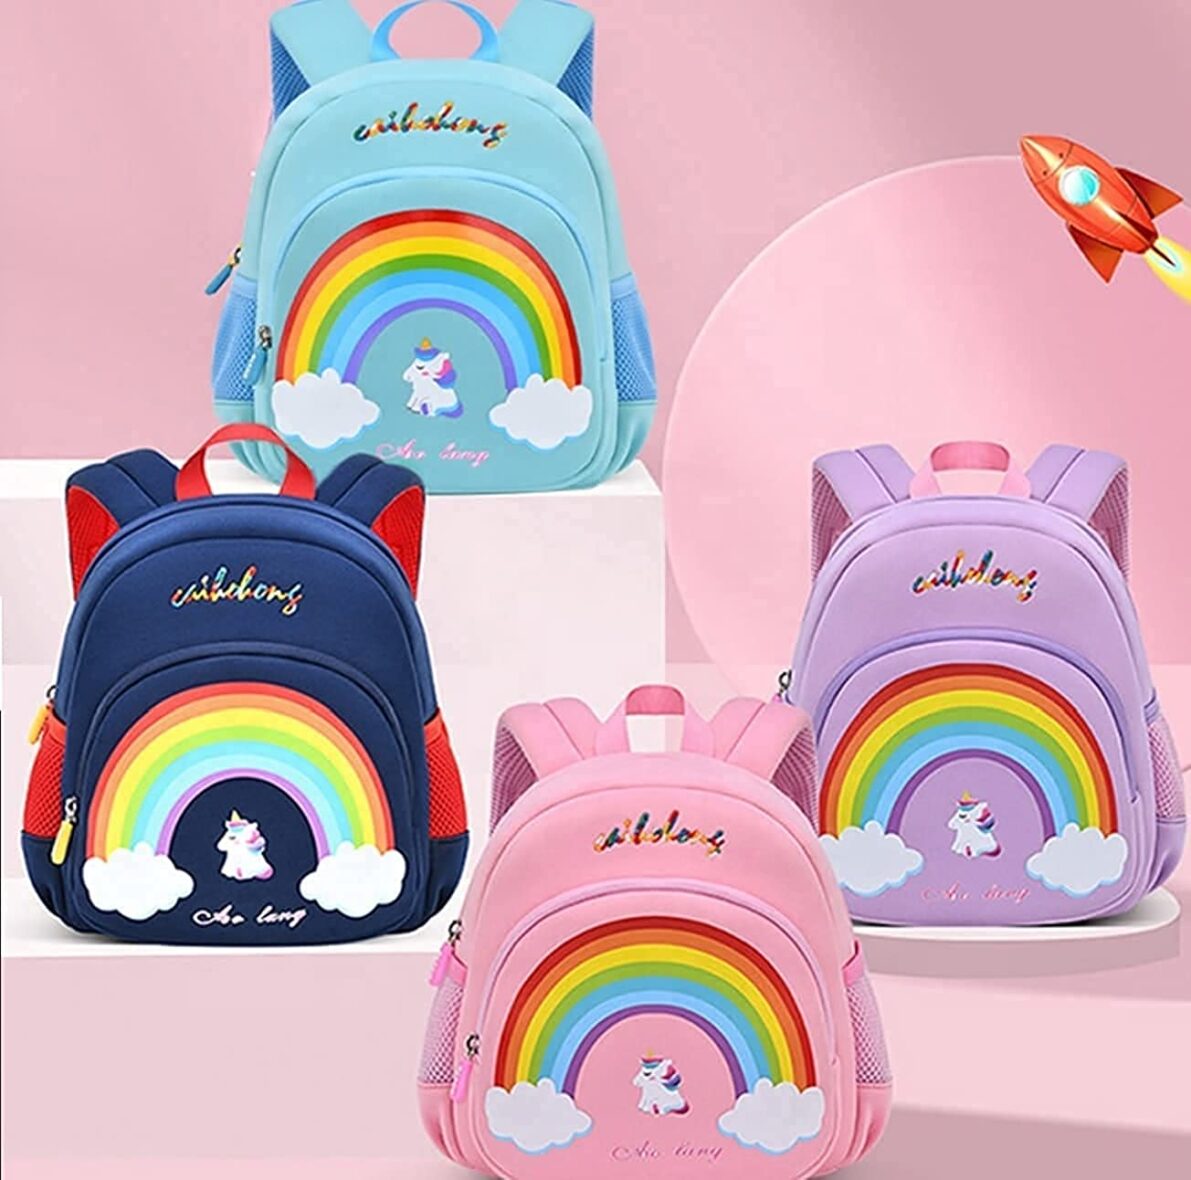 U smile Toddler Backpack, My Dreamy Unicorn, Baby Boys Girls Kindergarten Pre School Bag for Toddlers Age 2 to 5 Years, Purple 2 6